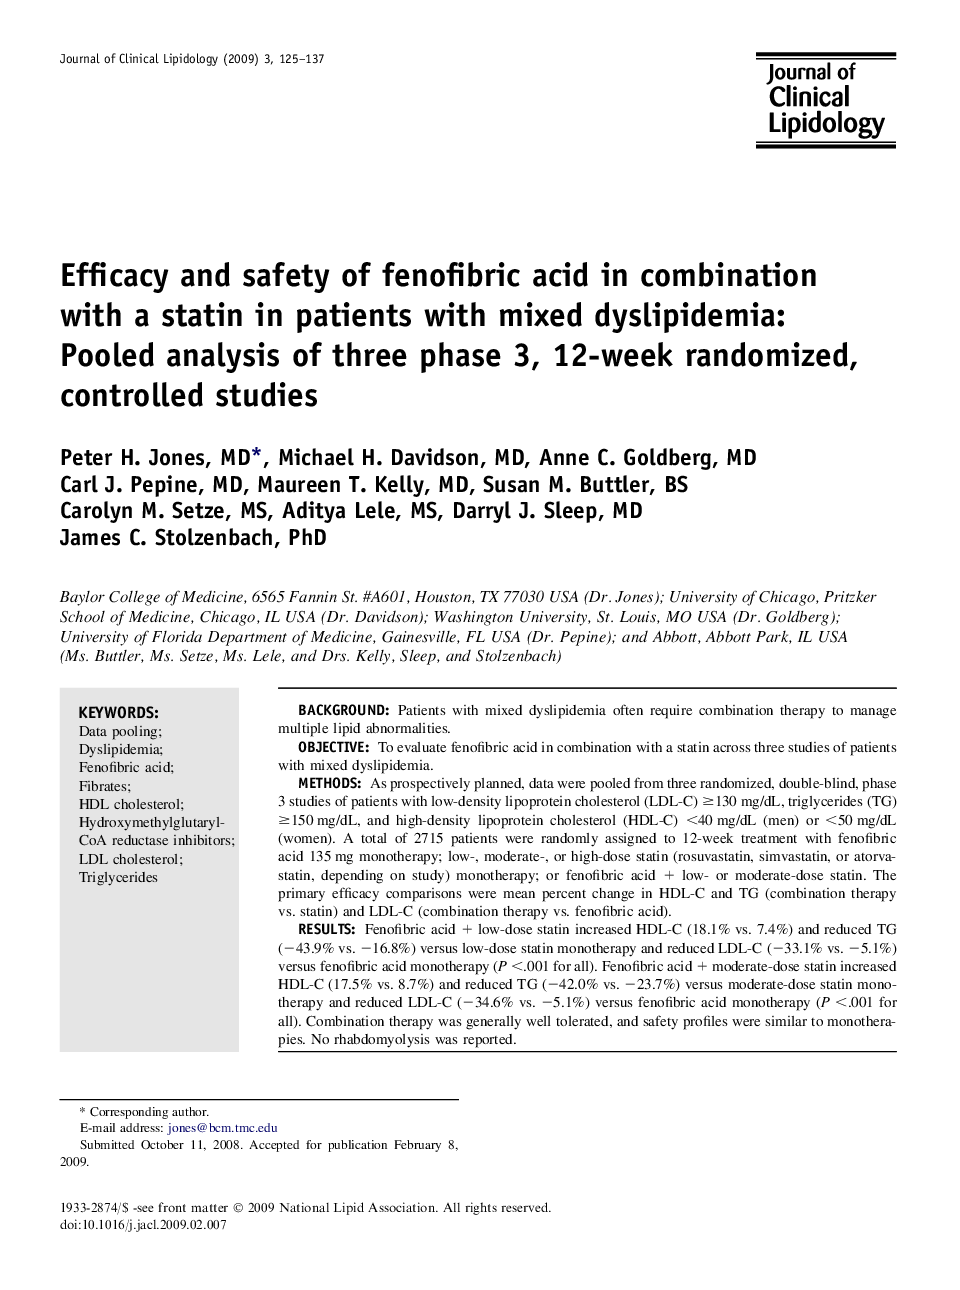 Efficacy and safety of fenofibric acid in combination with a statin in patients with mixed dyslipidemia: Pooled analysis of three phase 3, 12-week randomized, controlled studies